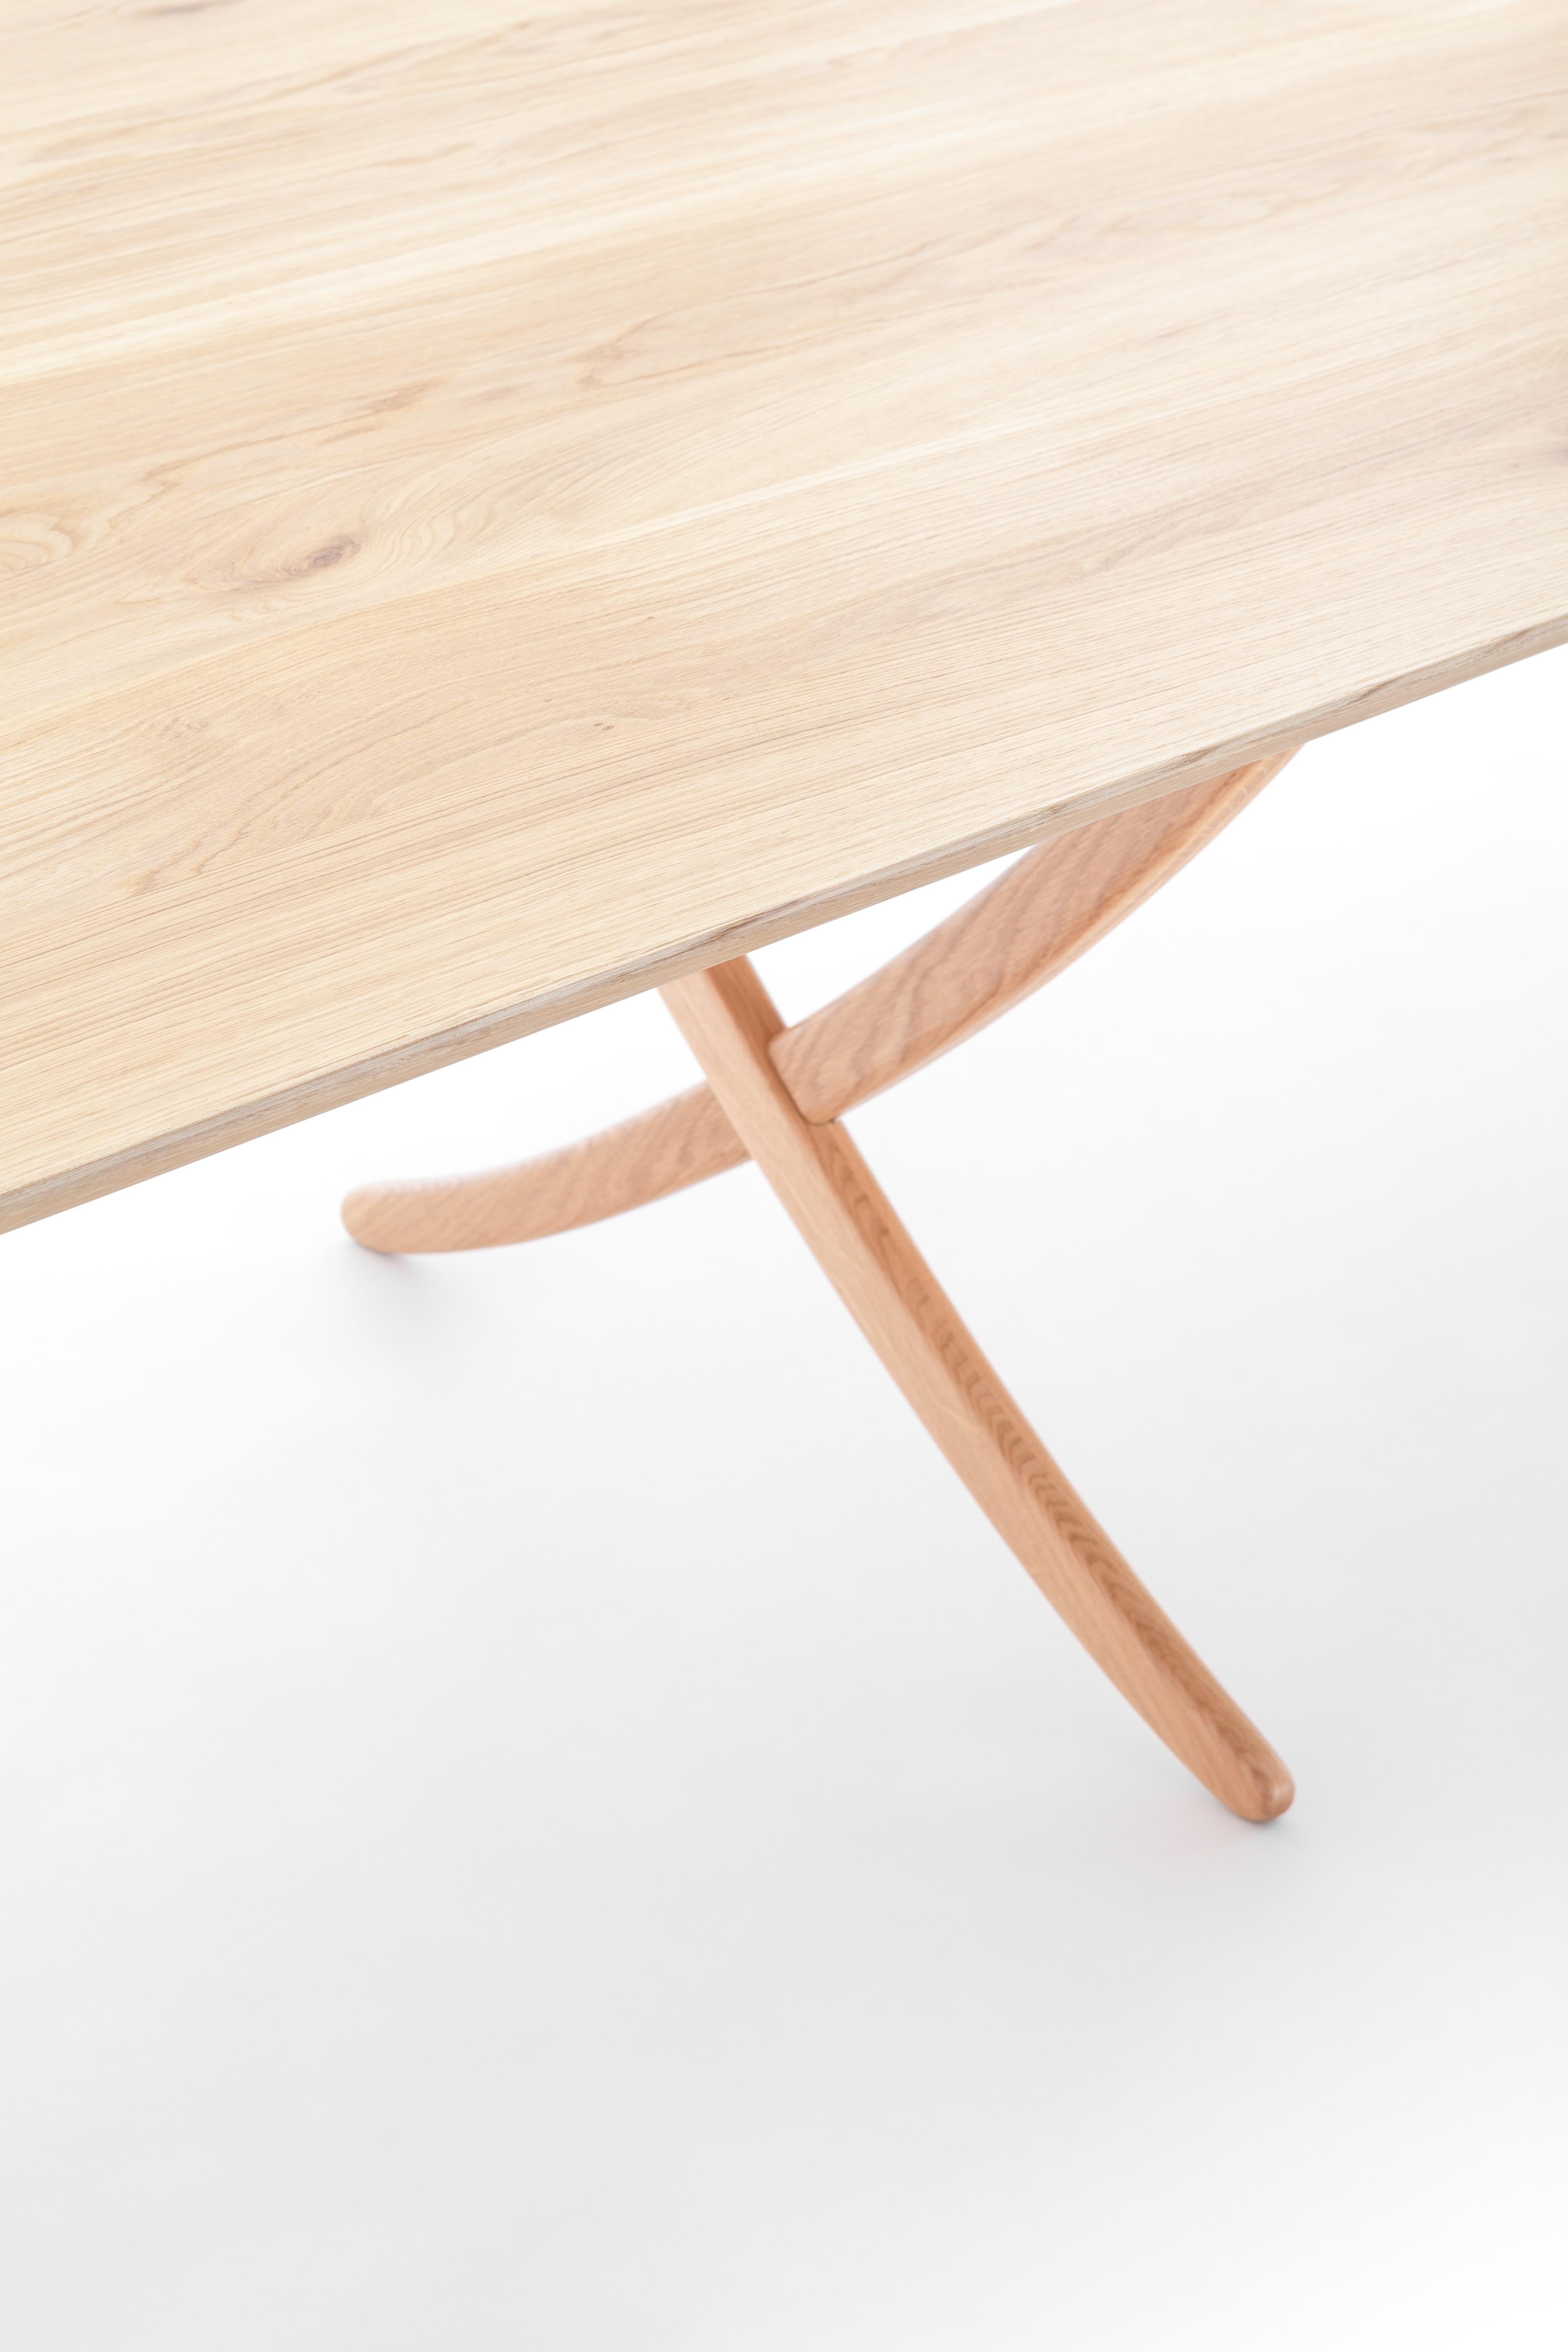 The Arch table comes from the desire to attain a lightness of shapes, expressed through fine and essential design lines.
Inspired by Scandinavian design, it is reinterpreted in an Italian artisan aesthetic,
The durmast is brushed to make the wood